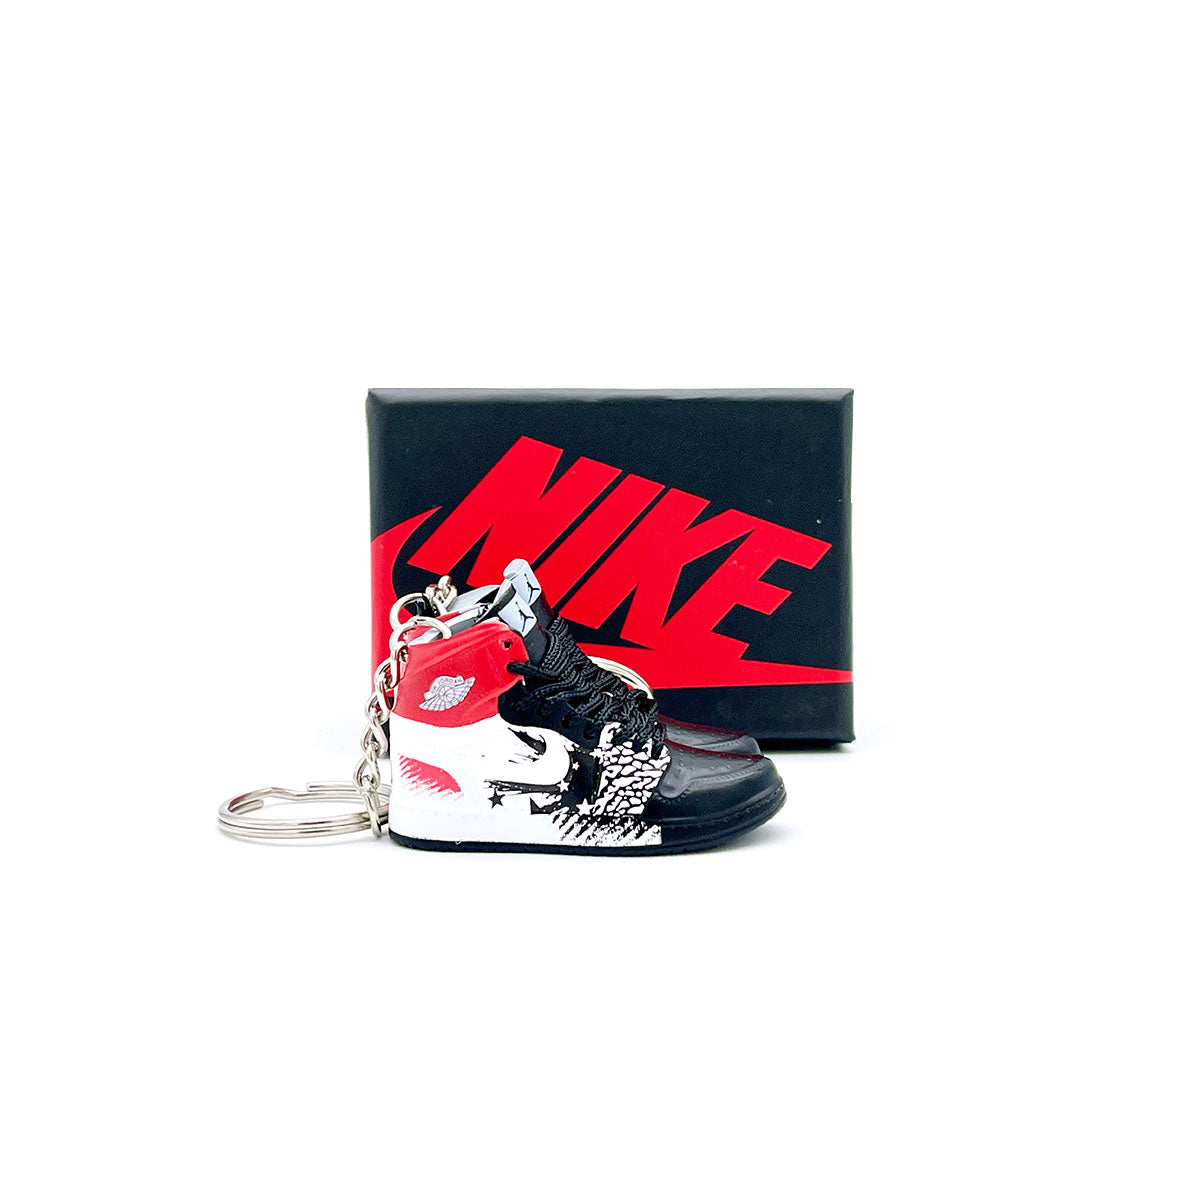 3D Sneaker Keychain- Air Jordan 1 High Dave White Wings for the Future Pair - KickzStore